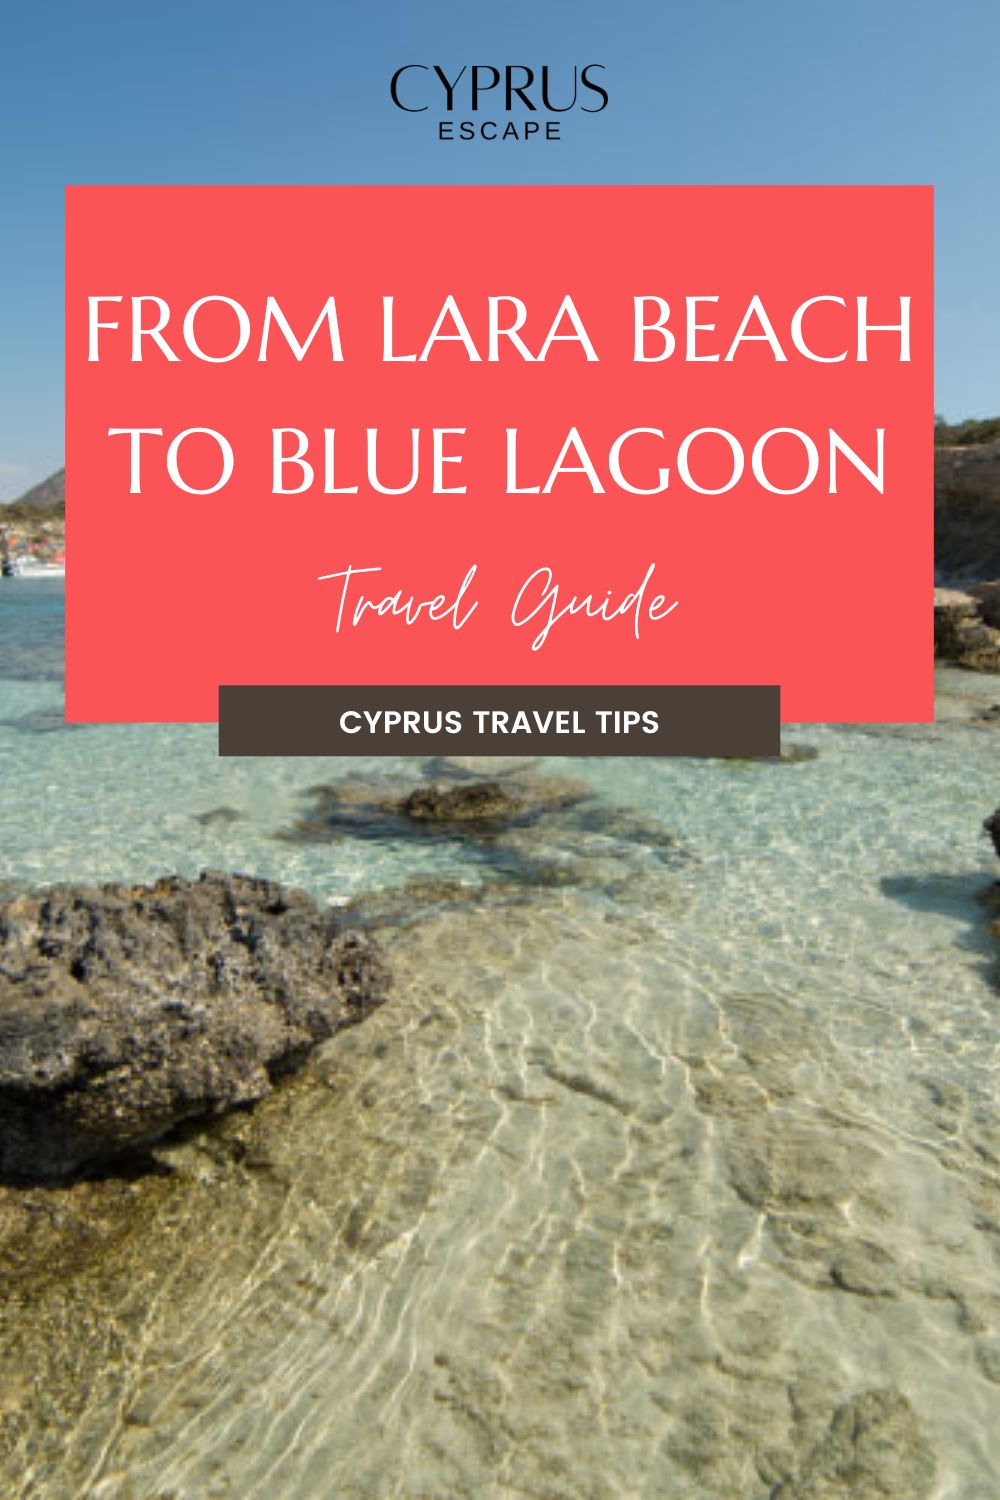 Pinterest Image For An Article About A Trip From Lara Beach to Blue Lagoon